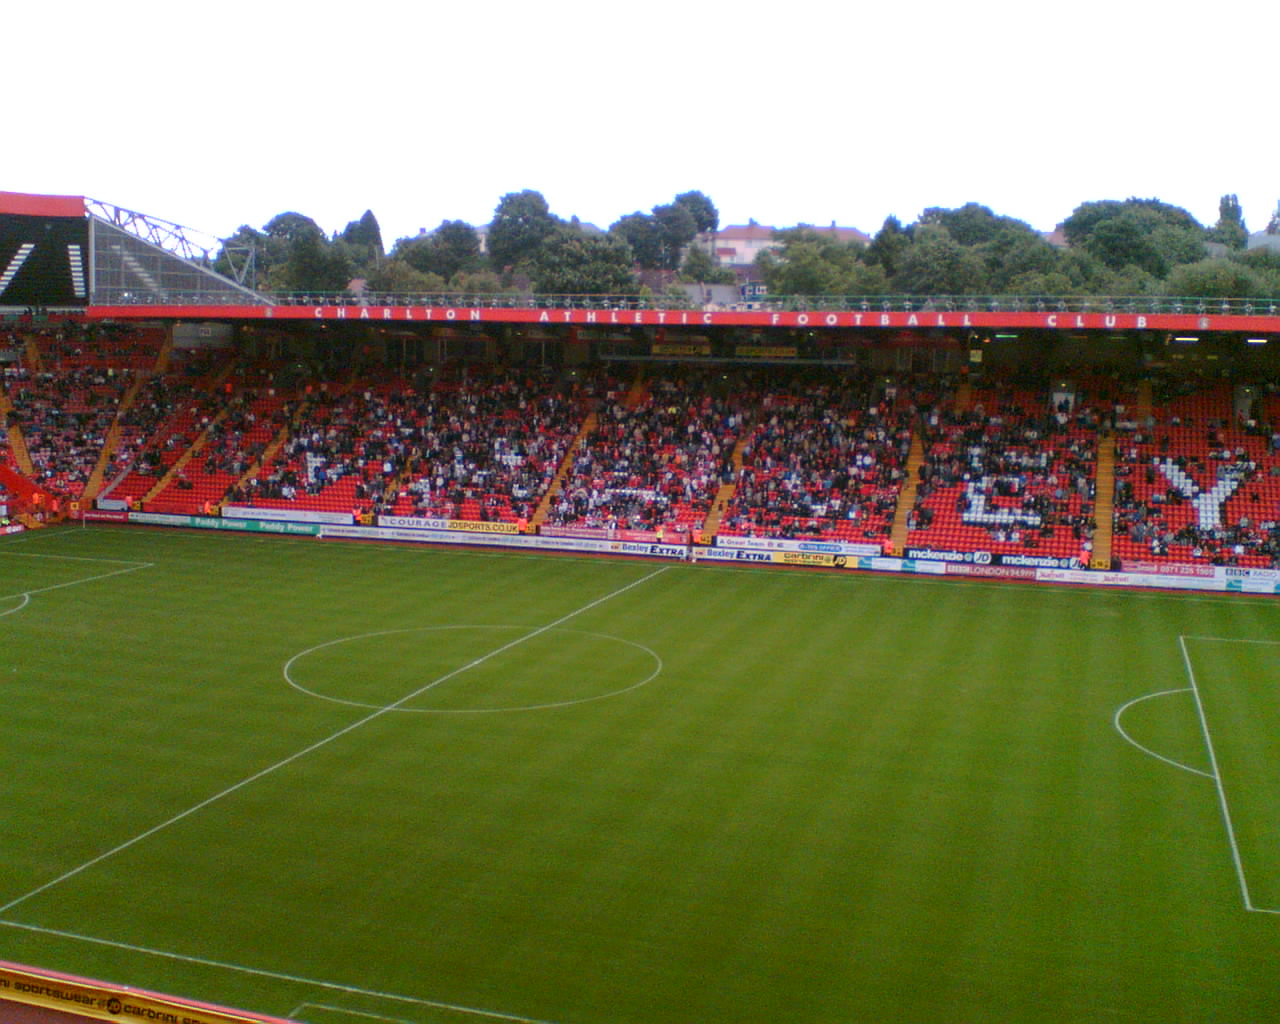 The East stand